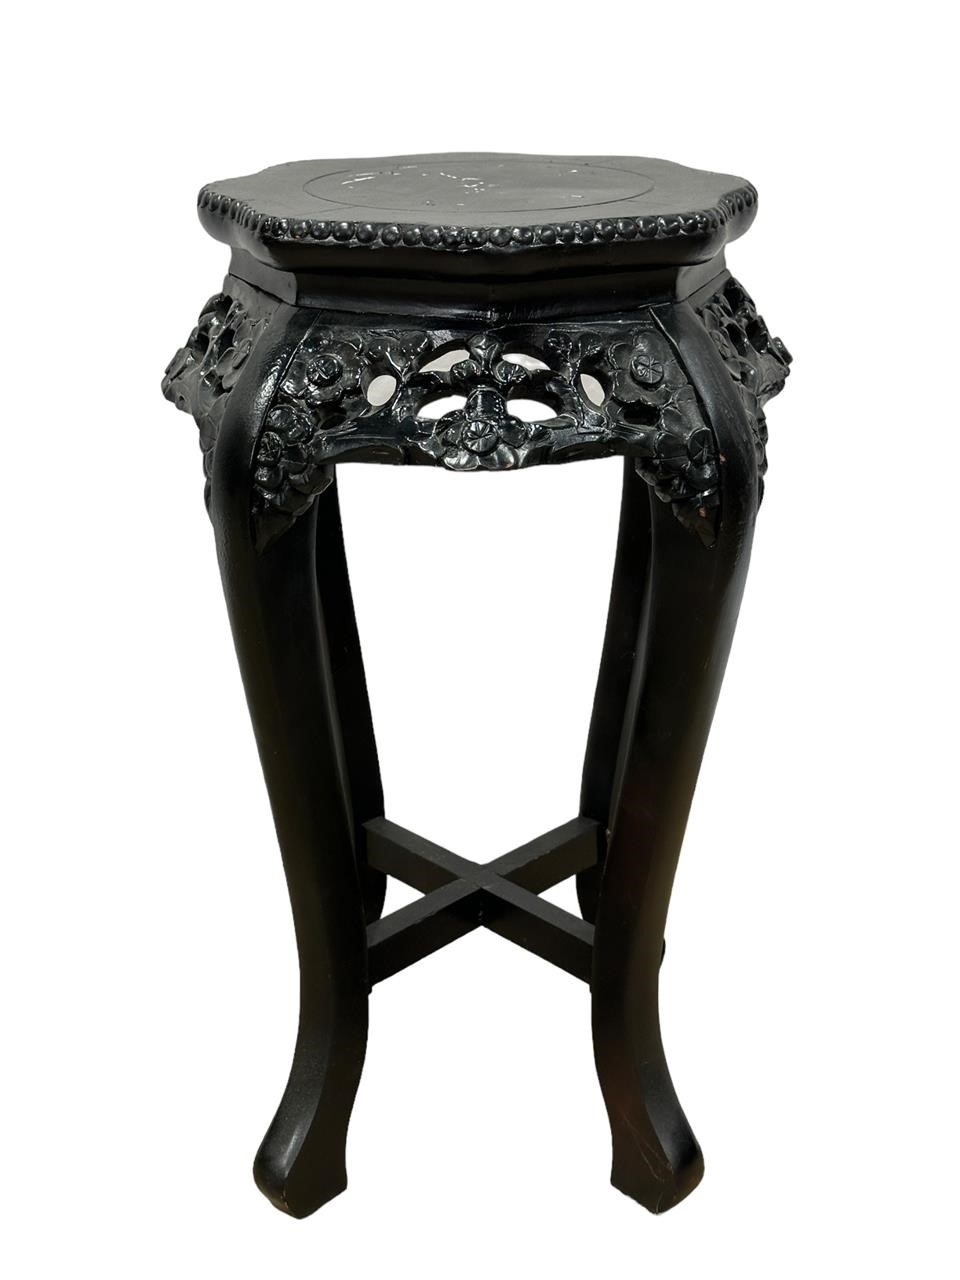 Antique Wood Carved Taboret Stand Painted Black